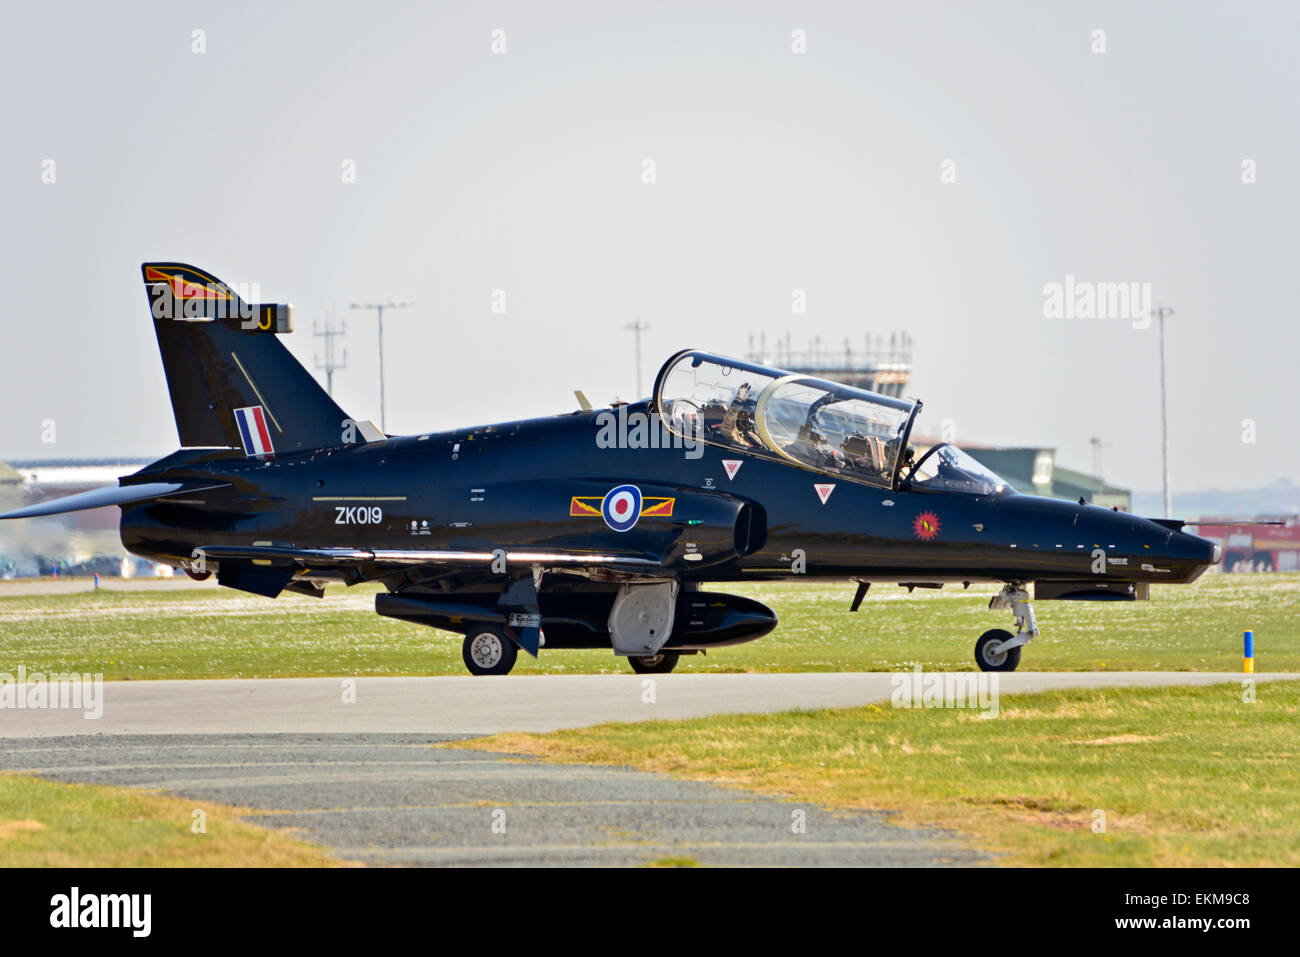 Raf Valley Anglesey North Wales Uk  ZK019 T2 Hawk Fast jet Stock Photo